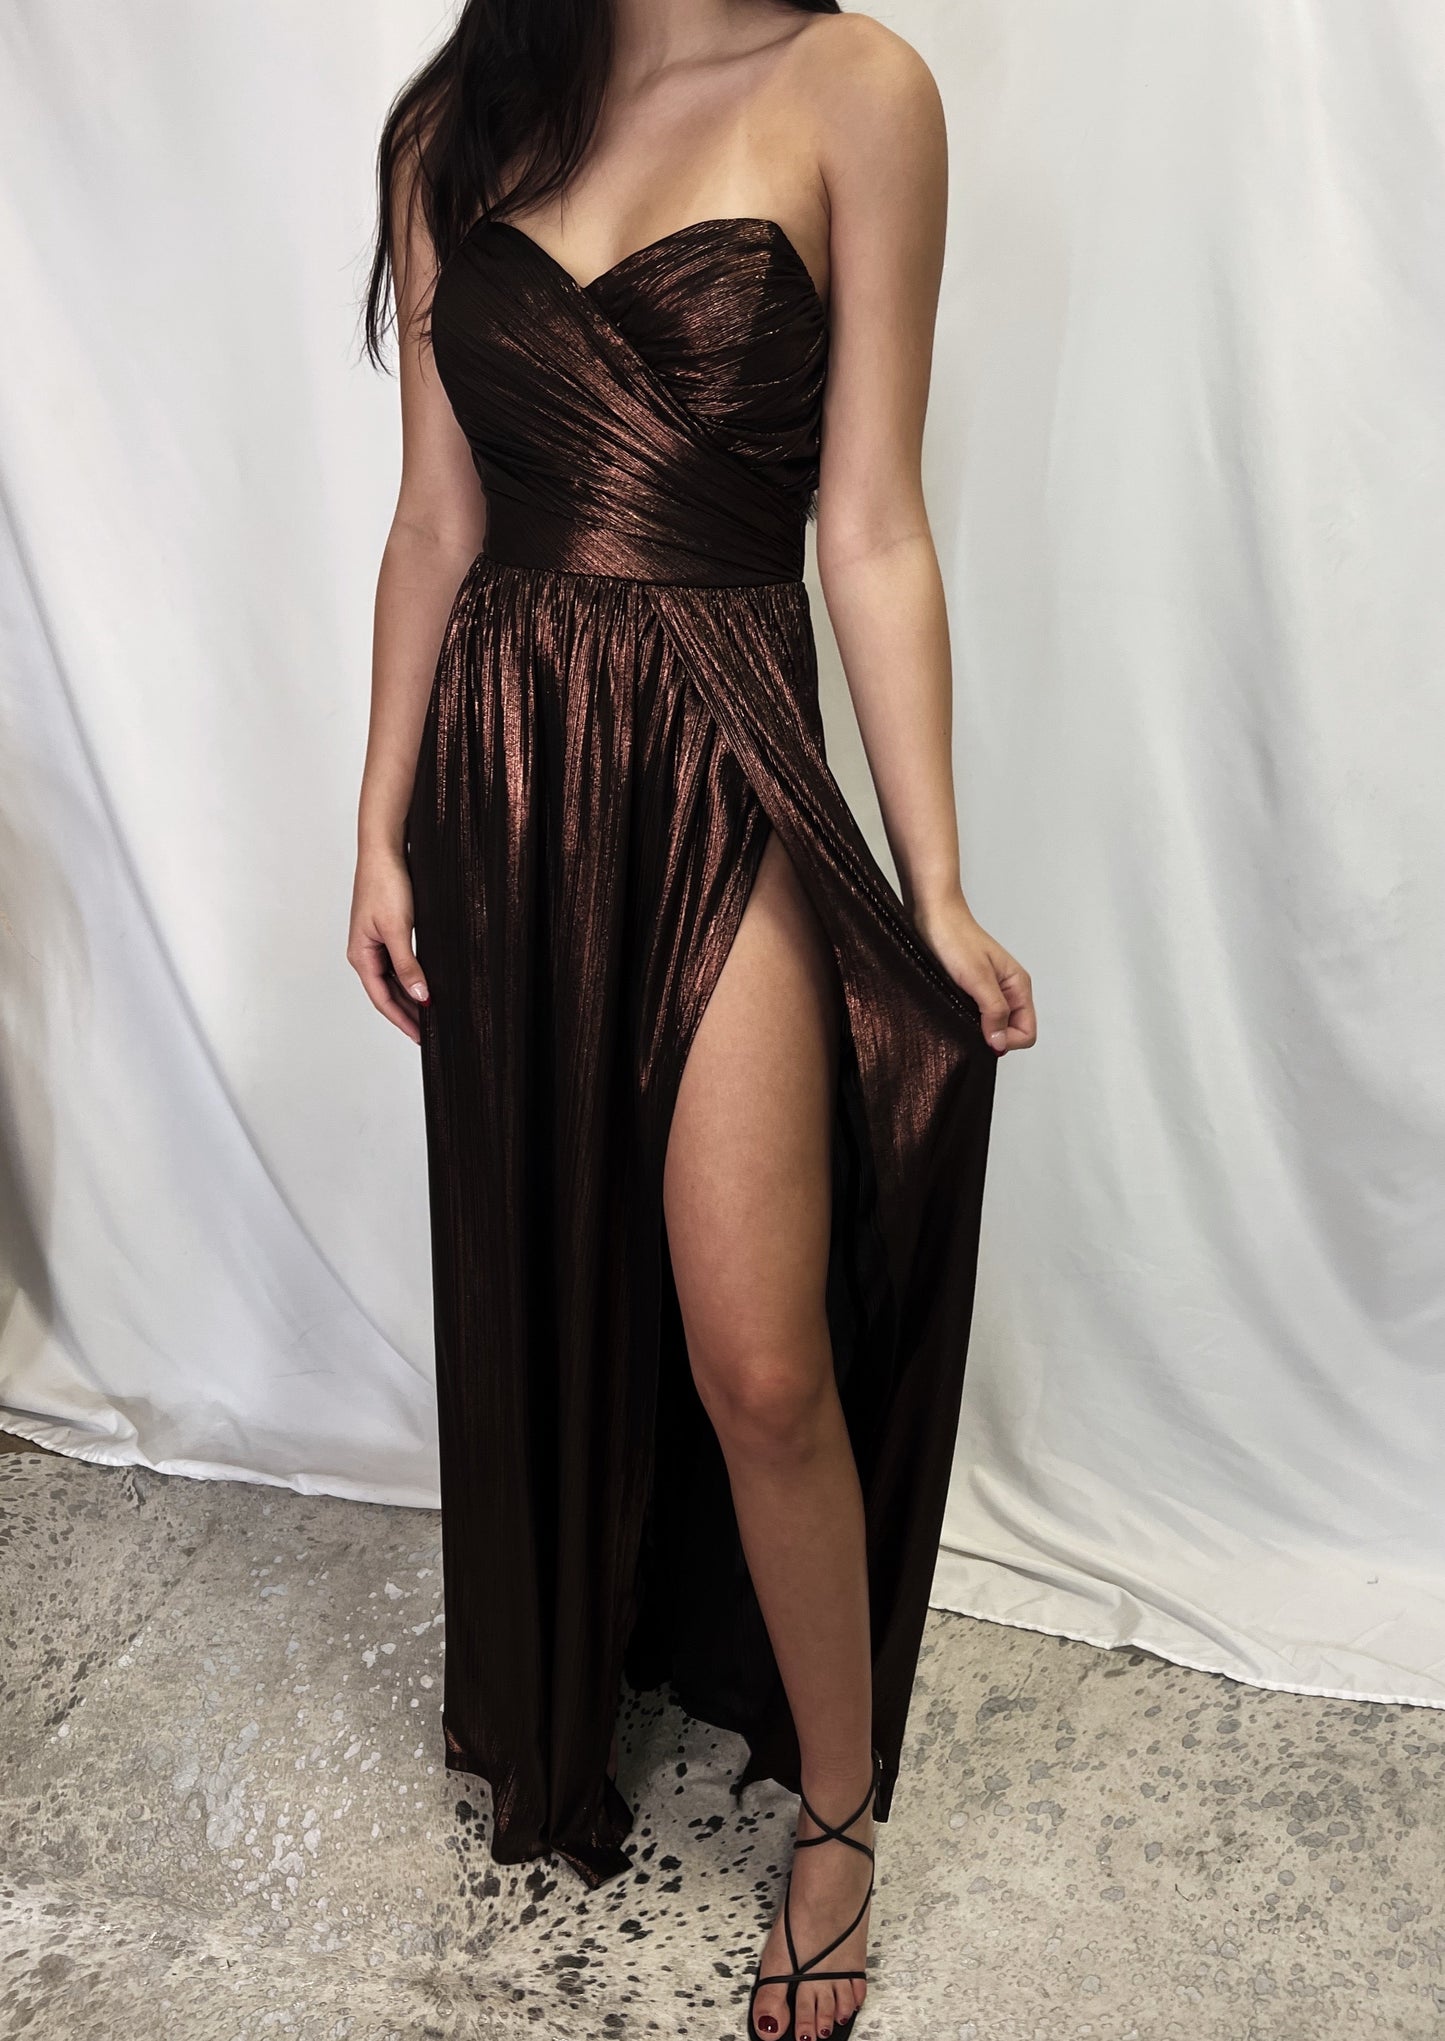 Chocolate Metallic Strapless Formal Dress | Private Label Styles